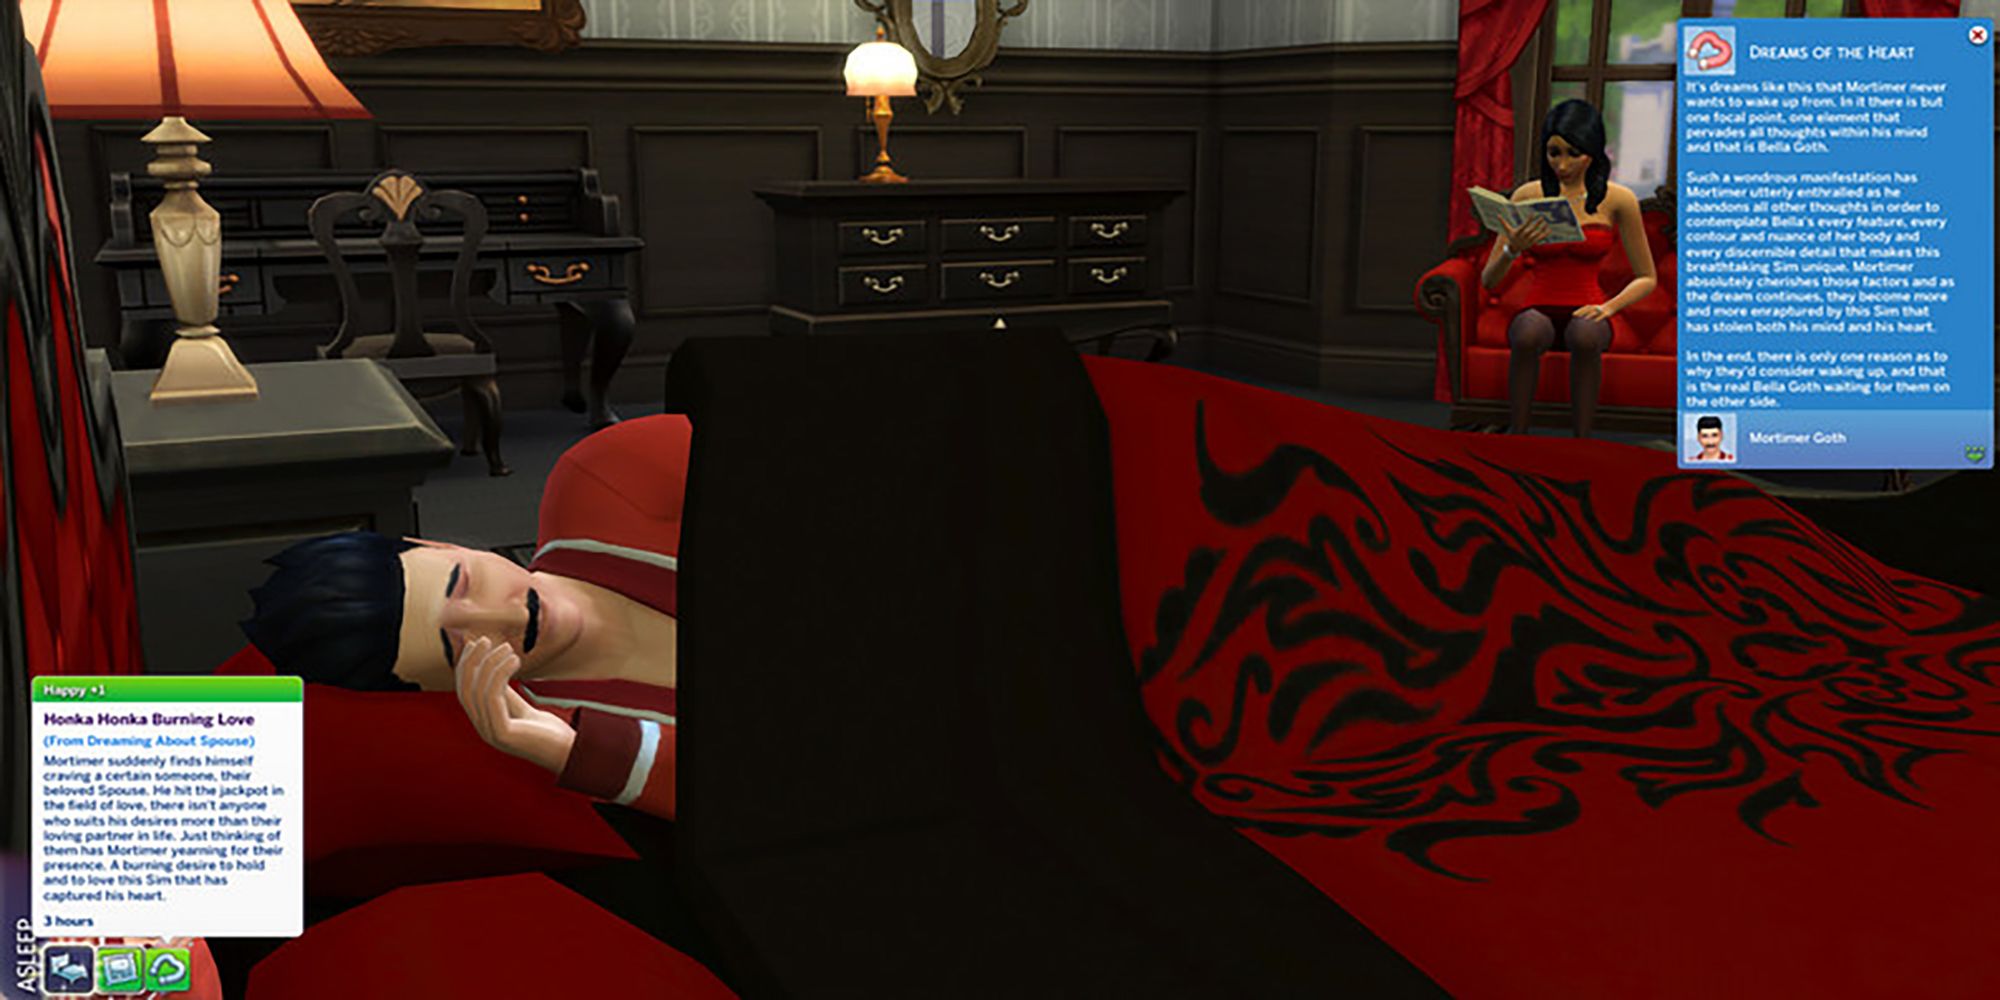 Mortimer Goth cries over his love for Bella Goth in the Wonderful Whims mode for The Sims 4.